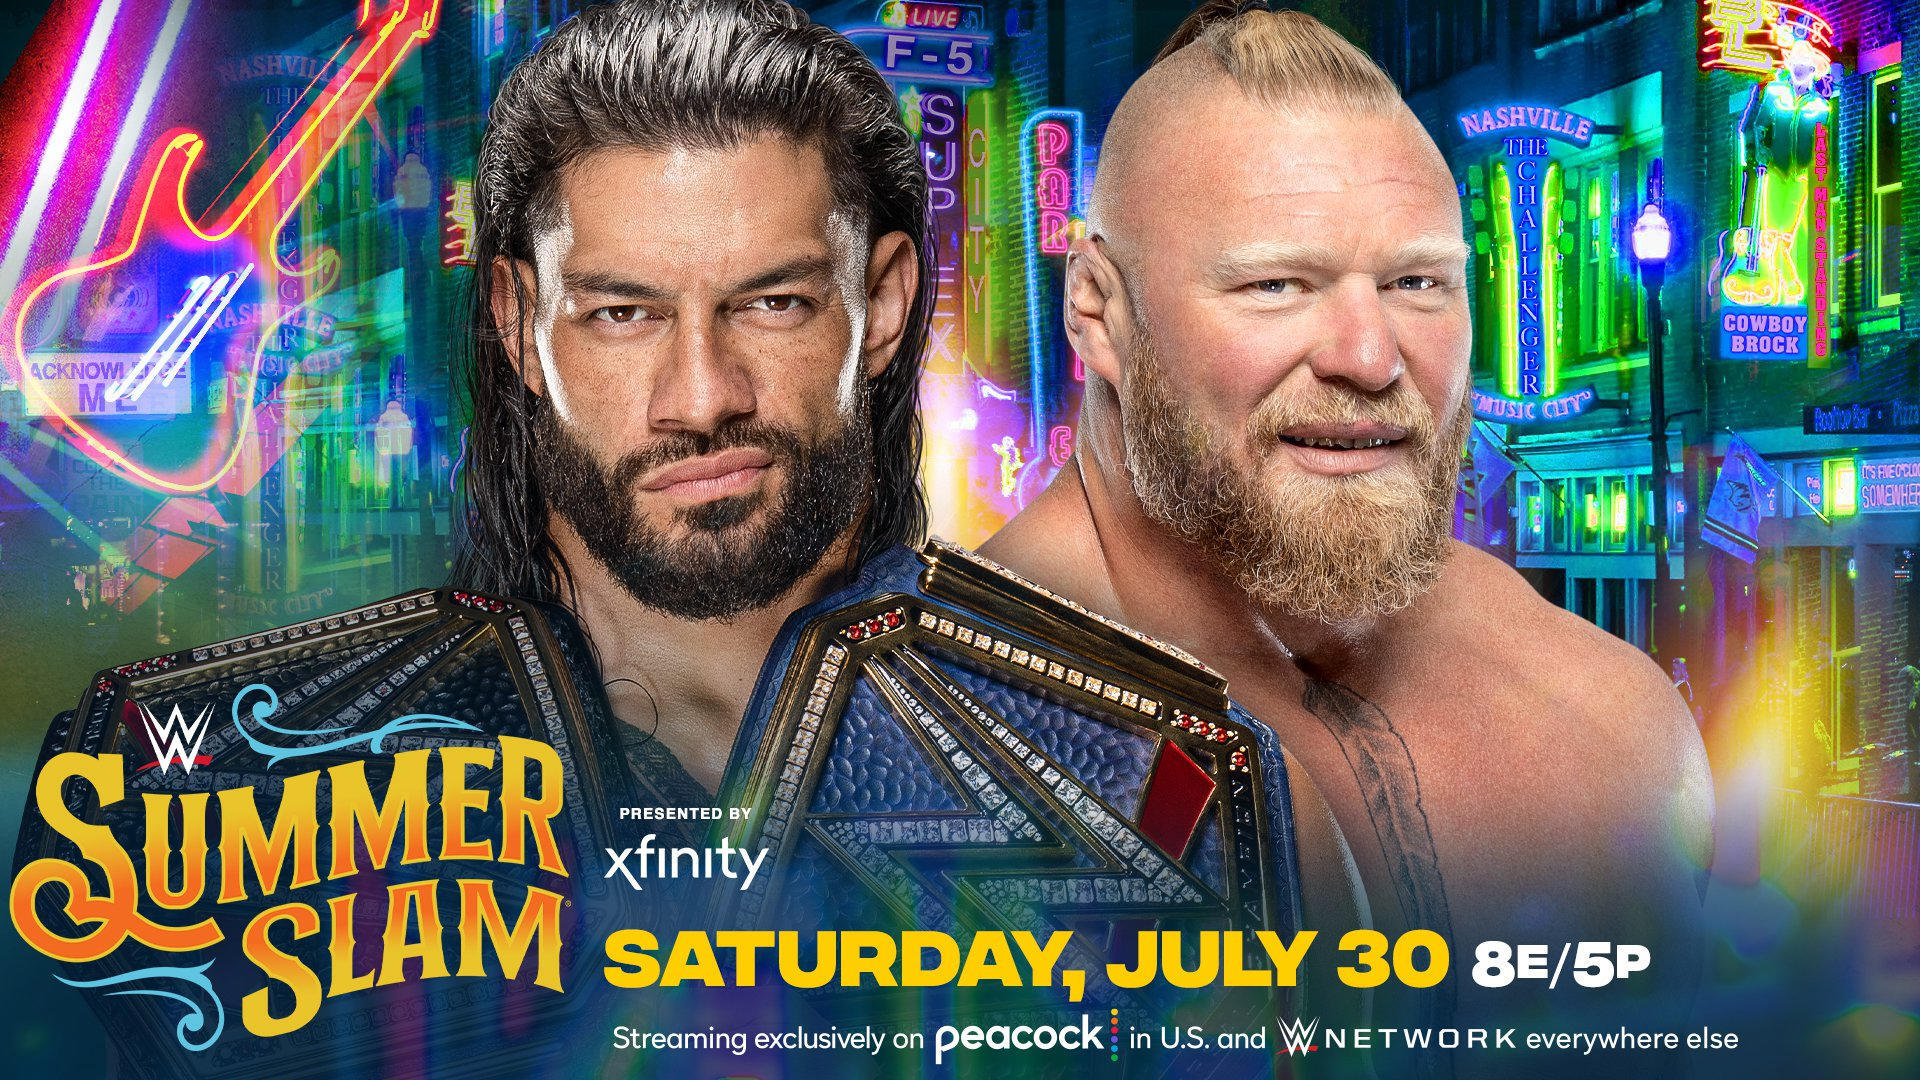 How to Watch WWE SummerSlam Live on July 30